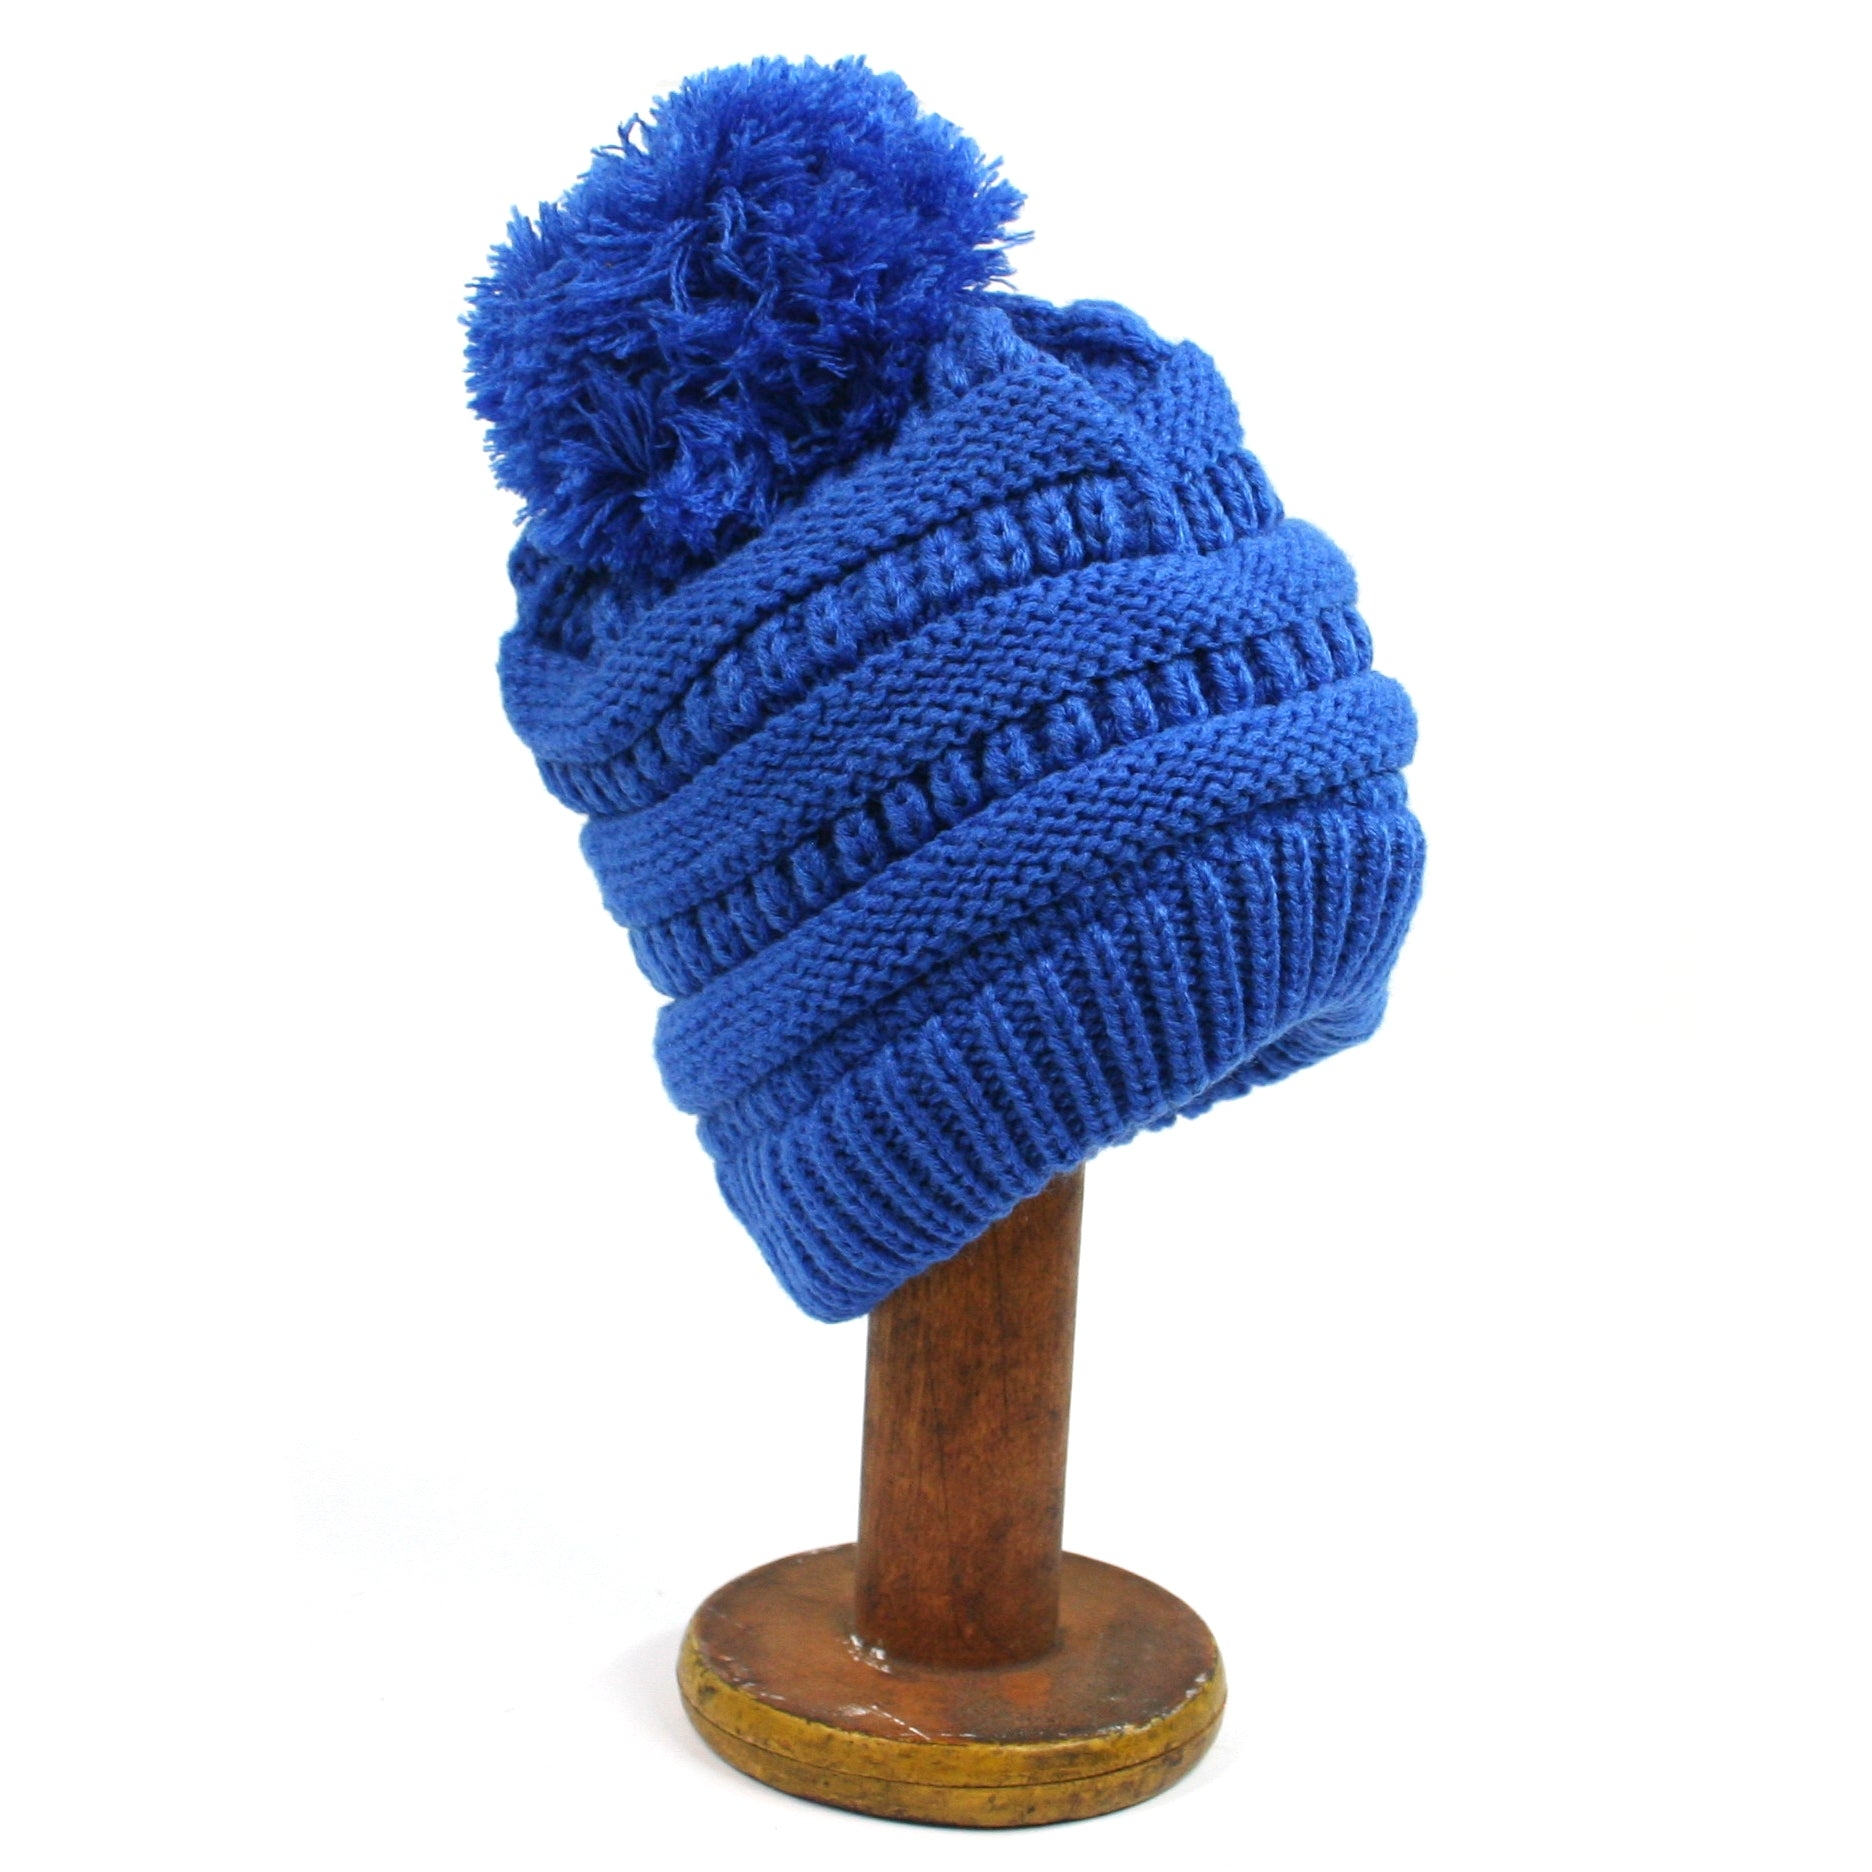 Childs Knitted Style Pom Pom Beanie Hat Blue – One Size Fits All Design – The Scarf Giraffe